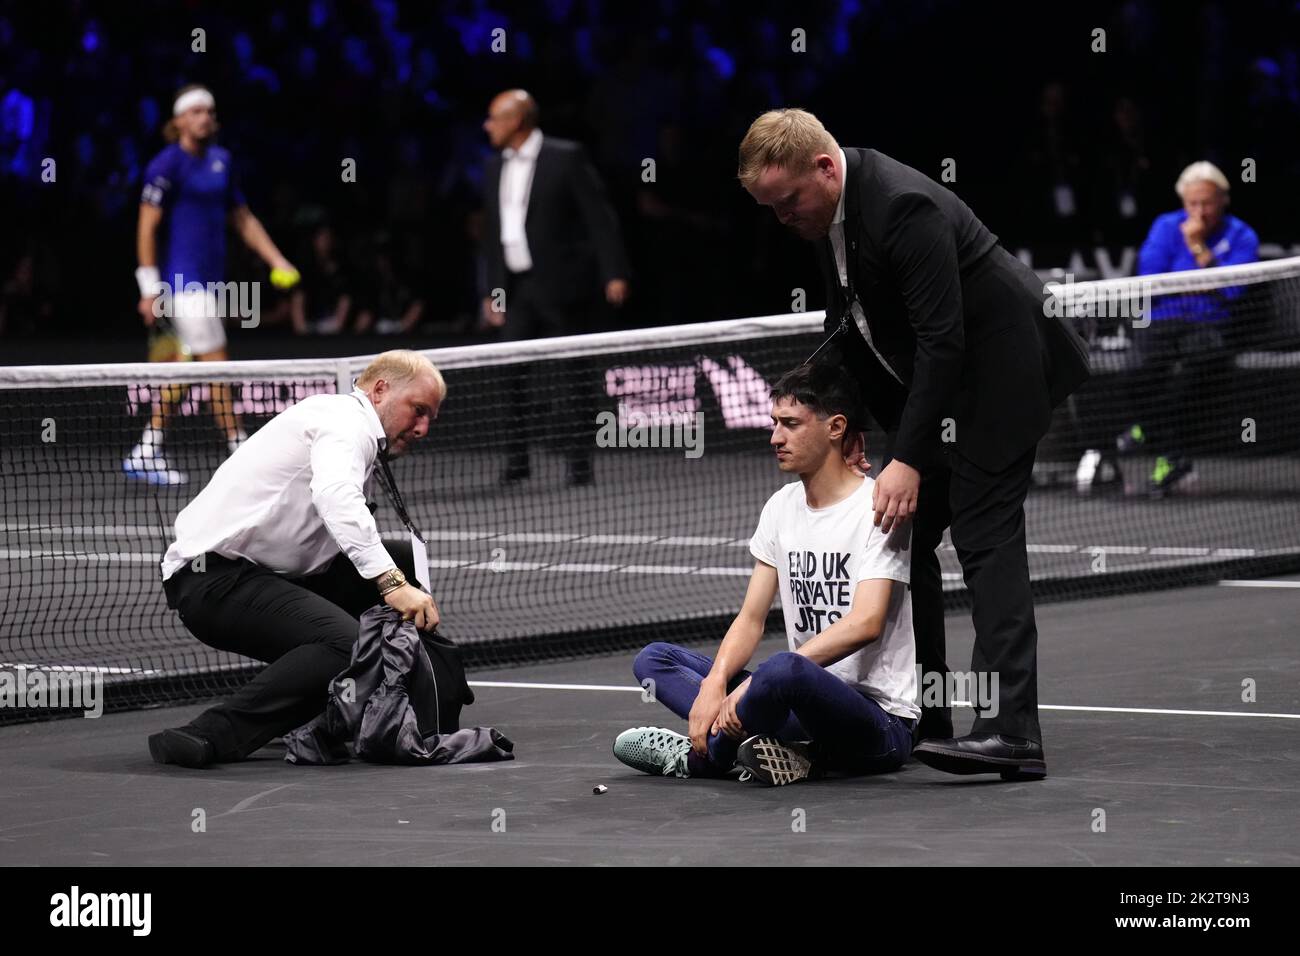 Steward remove a protester after setting fire to the court on day one of the Laver Cup at the O2 Arena, London. Picture date: Friday September 23, 2022. Stock Photo